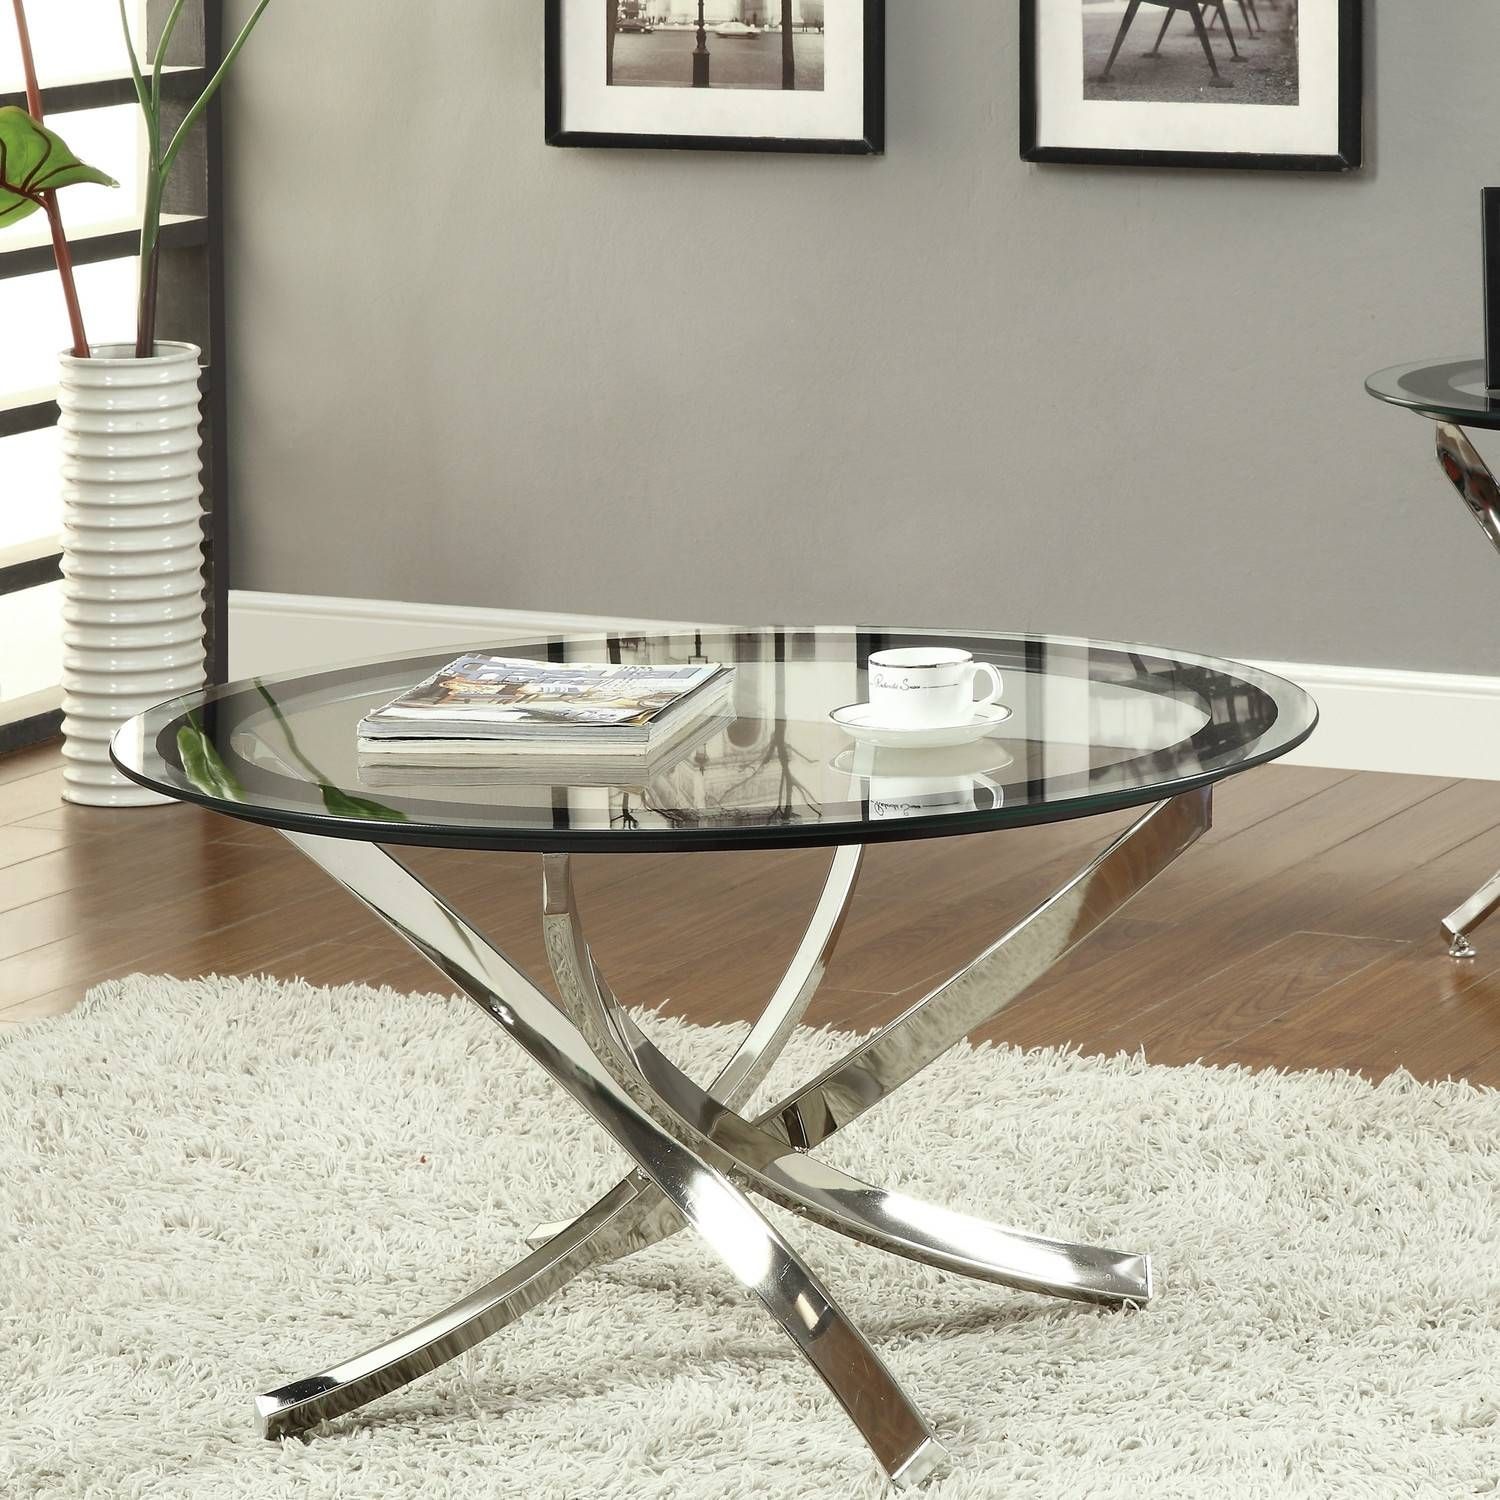 Modern Glass Coffee Table Chrome Finish Tempered Glass Surface Intended For Metal And Glass Coffee Tables (View 20 of 30)